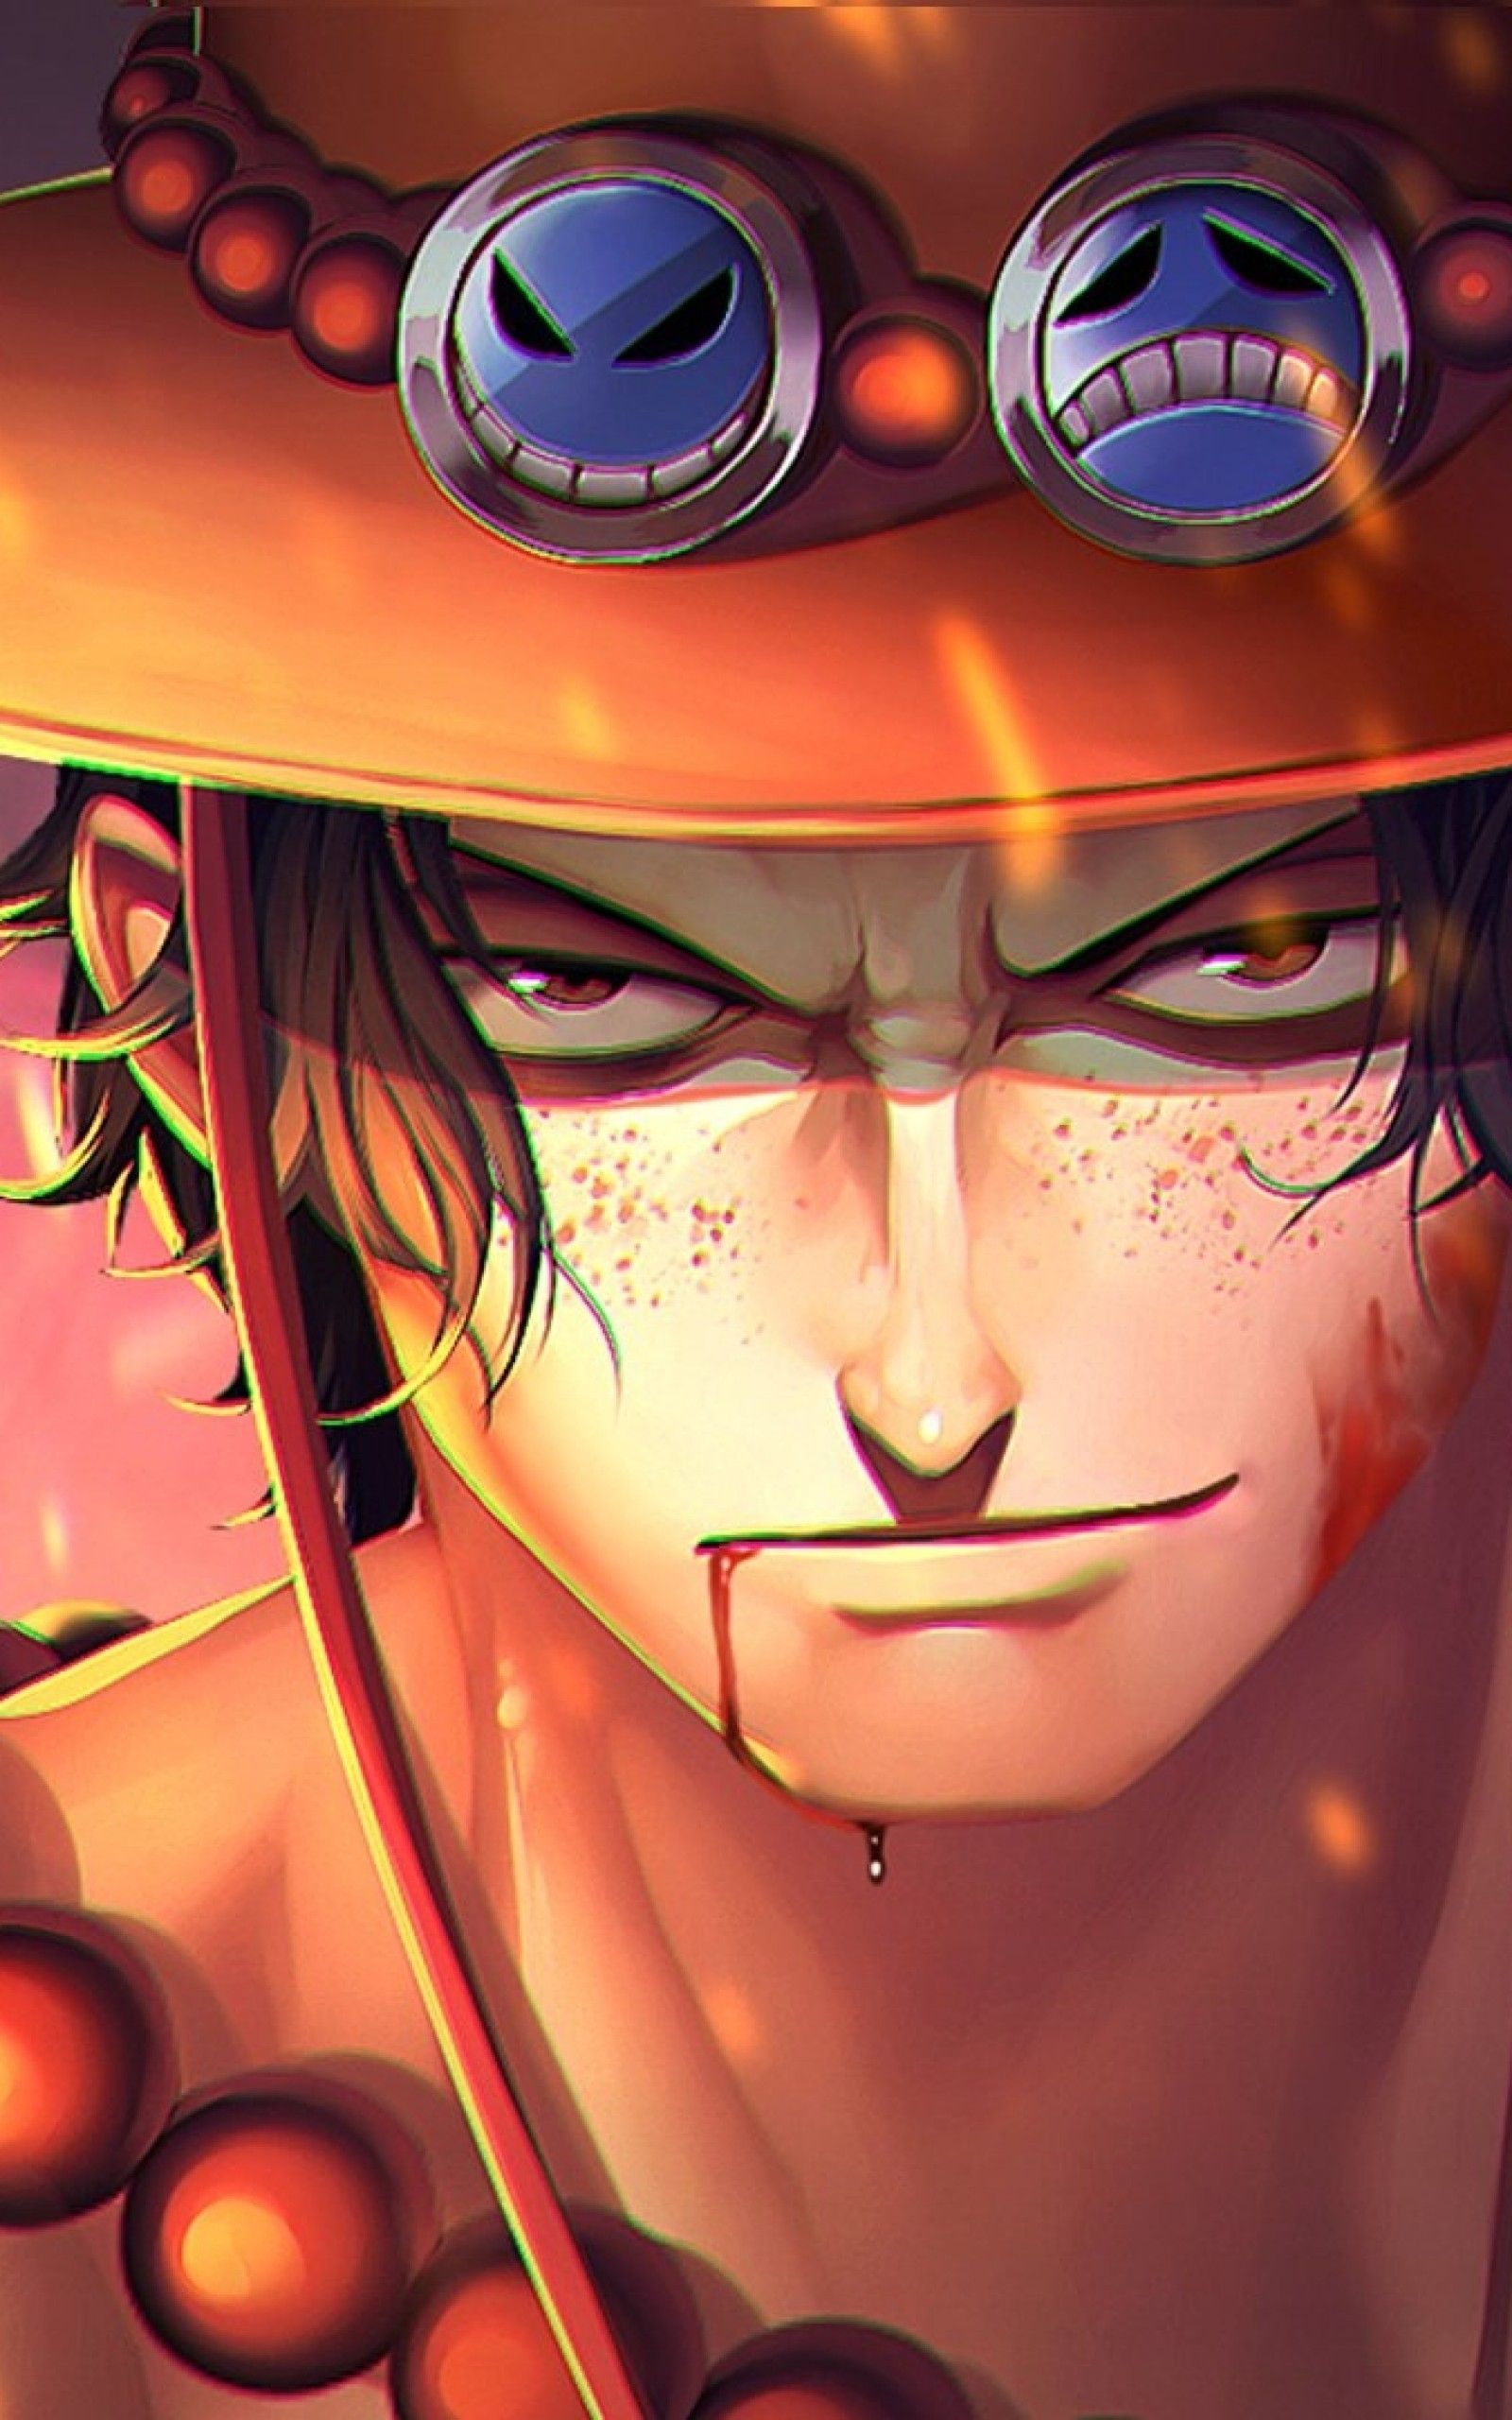 Android One Piece Ace Wallpapers - Wallpaper Cave